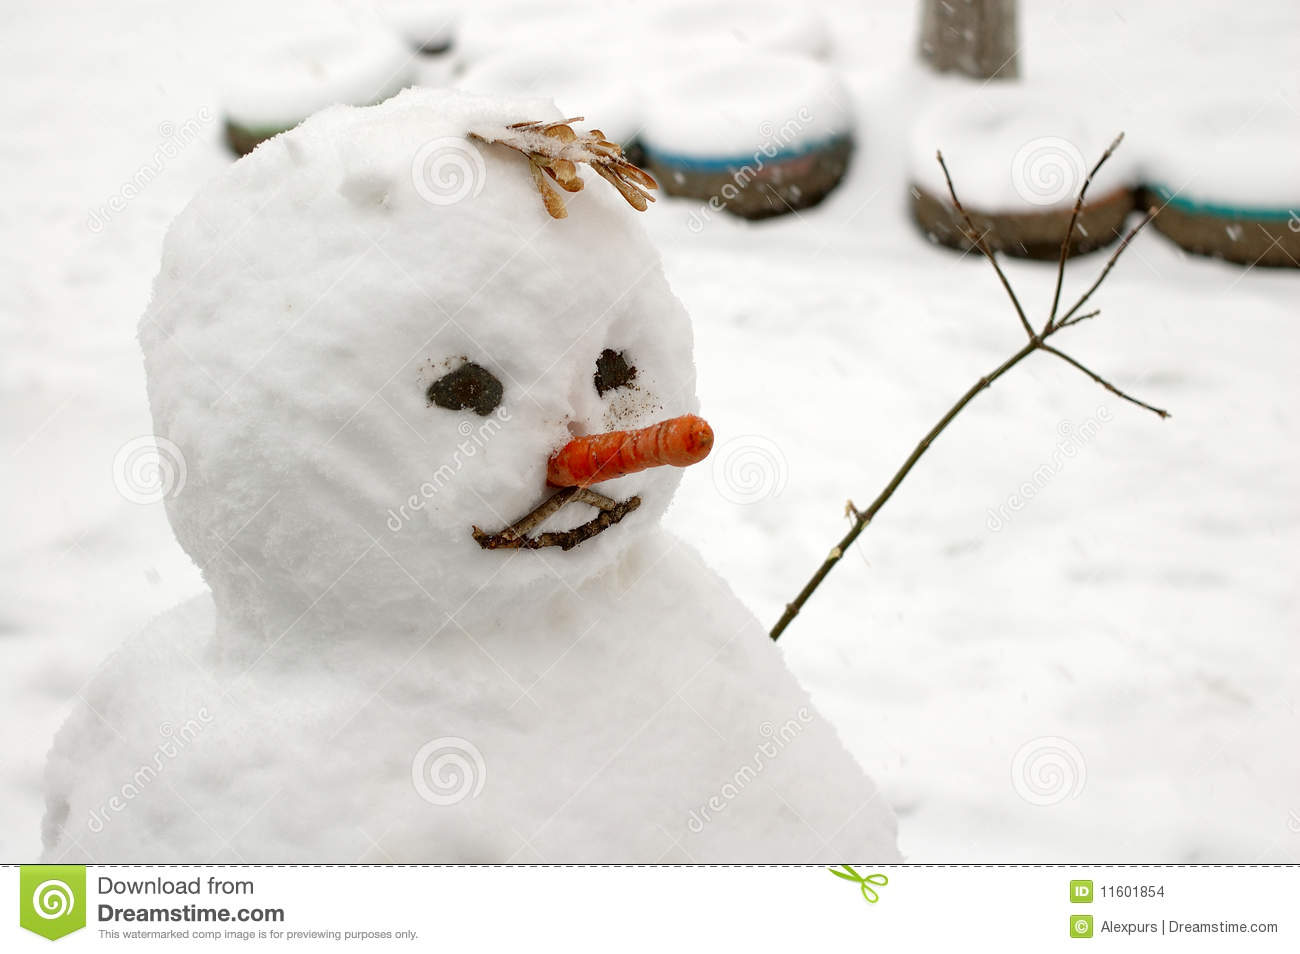 Funny Snowman With Carrot Nose  Stock Images   Image  11601854